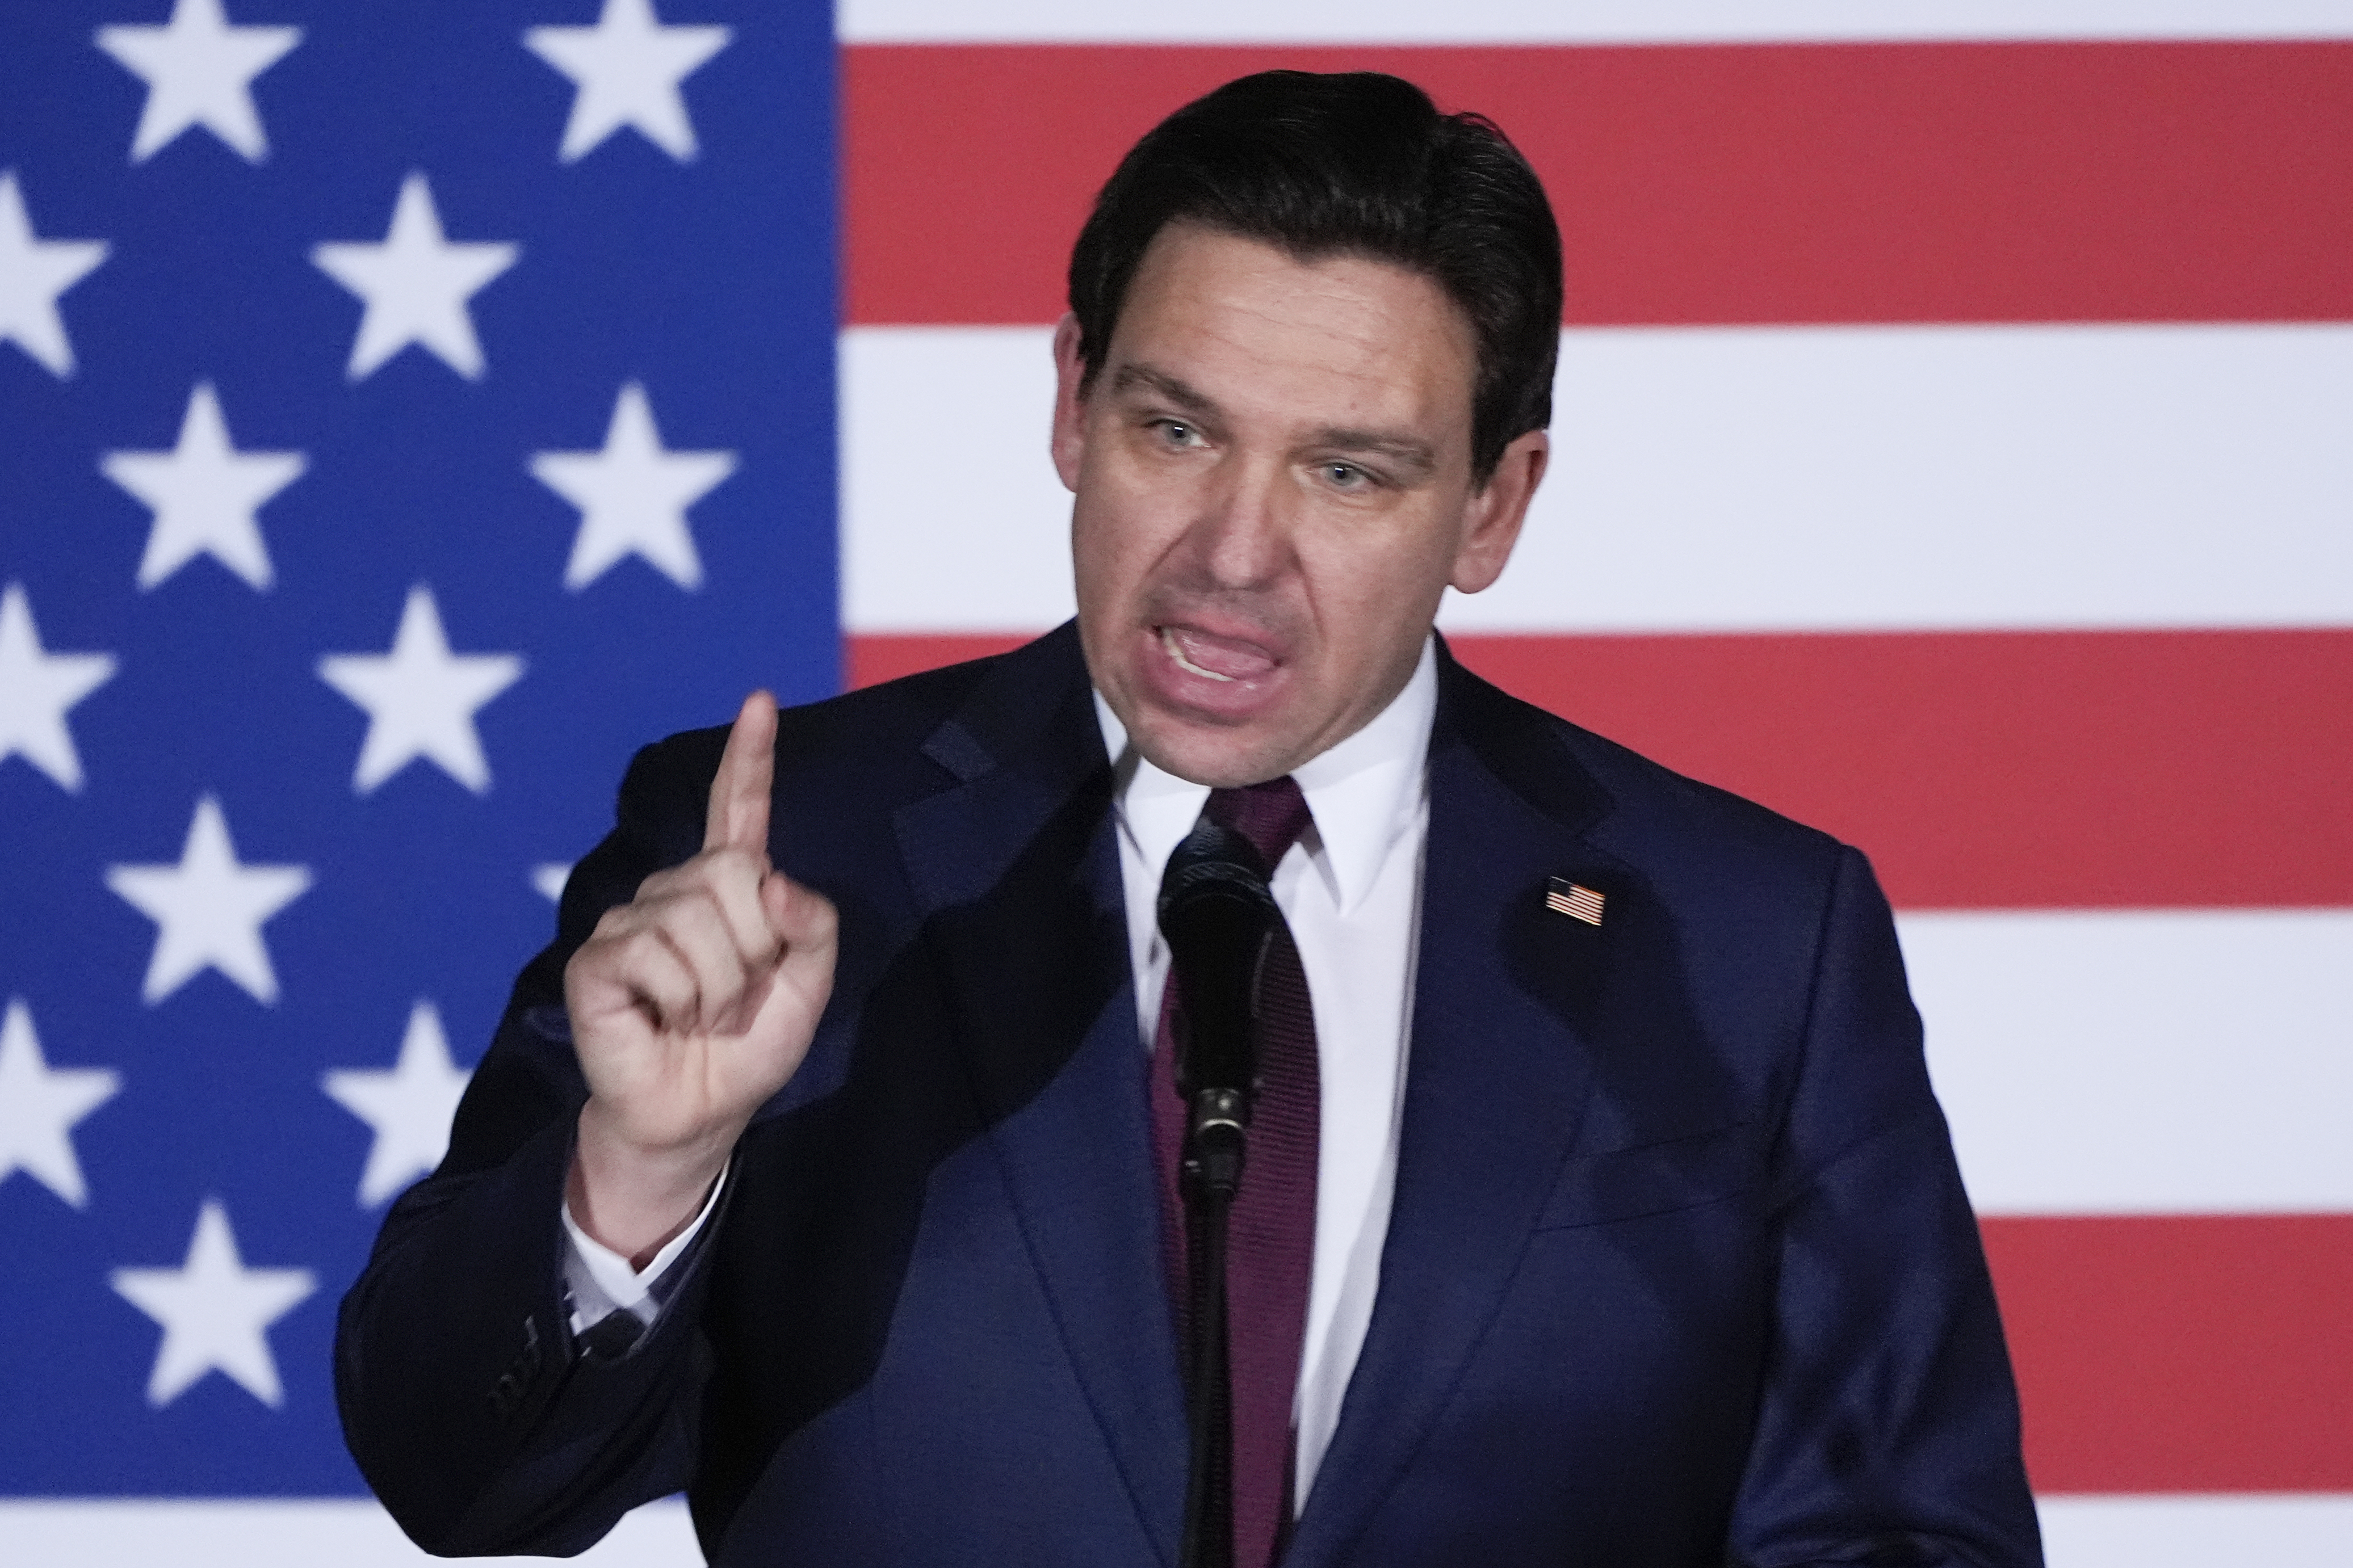 Failed operation to make Ron DeSantis GOP nominee cost $168